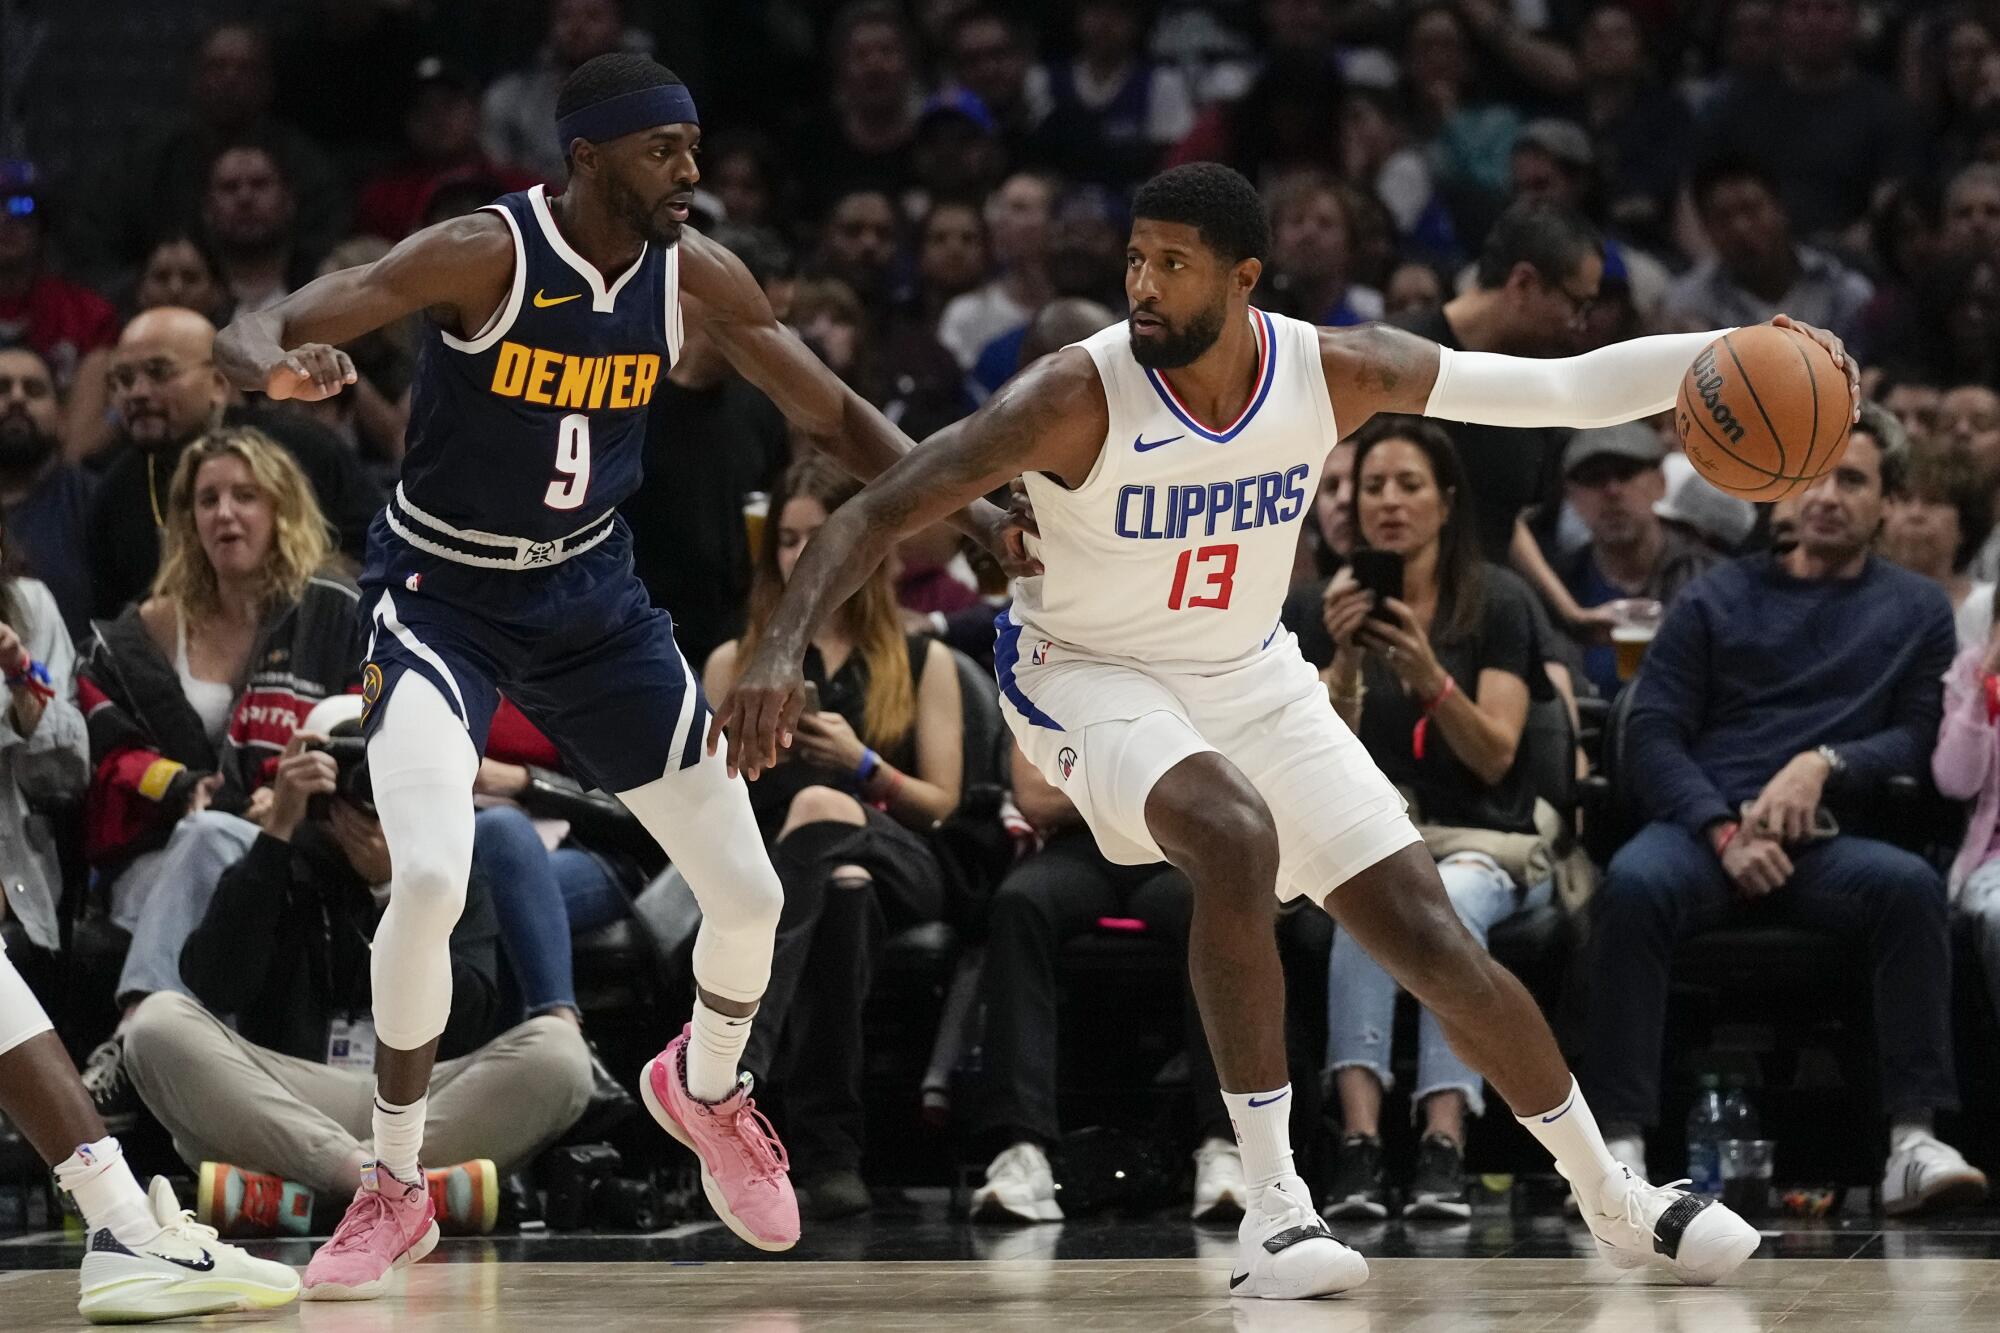 Short-handed Clippers fall to Nuggets